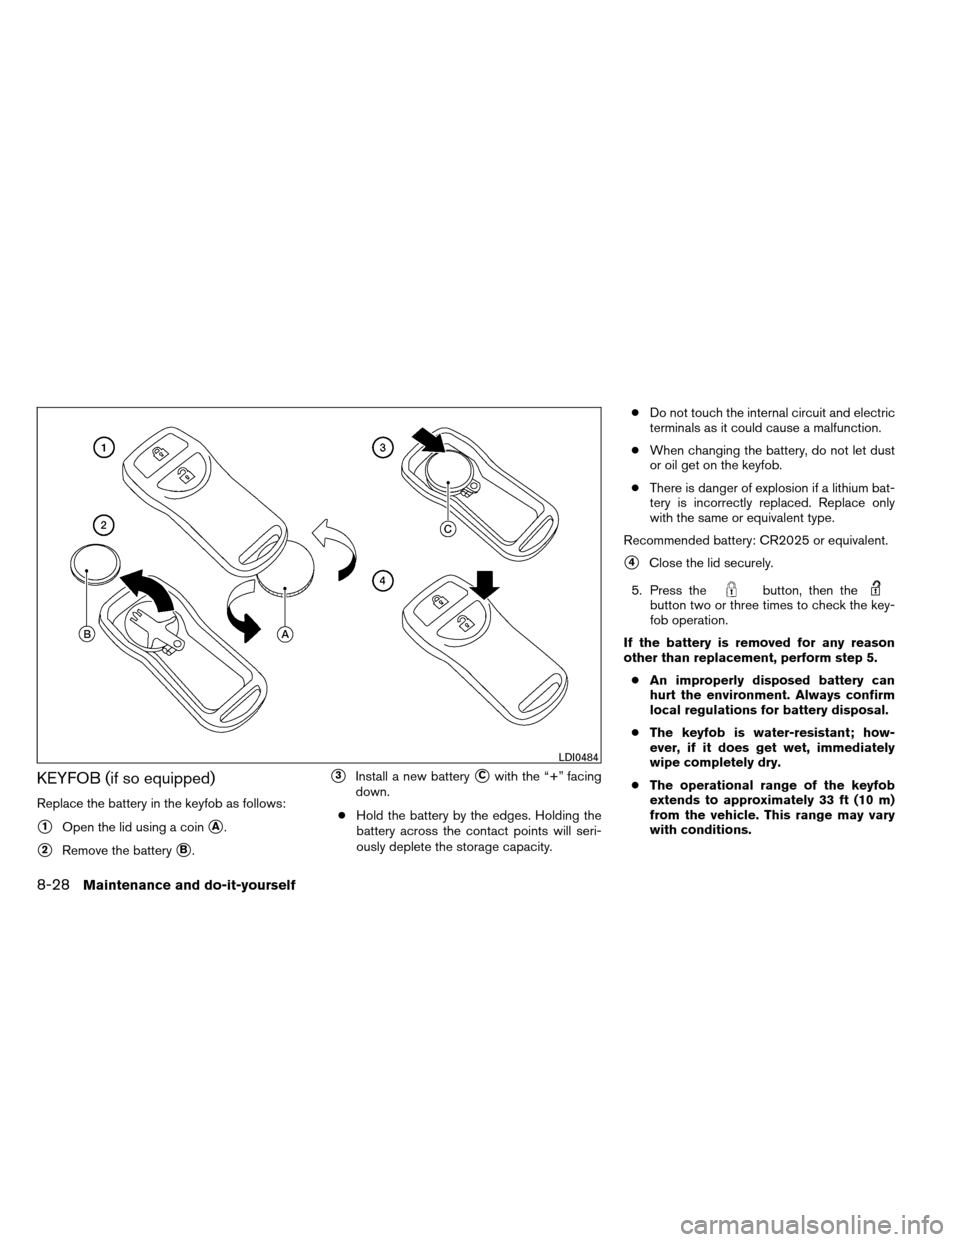 NISSAN ARMADA 2012 1.G Owners Manual KEYFOB (if so equipped)
Replace the battery in the keyfob as follows:
1Open the lid using a coinA.
2Remove the batteryB.
3Install a new batteryCwith the “+” facing
down.
● Hold the battery